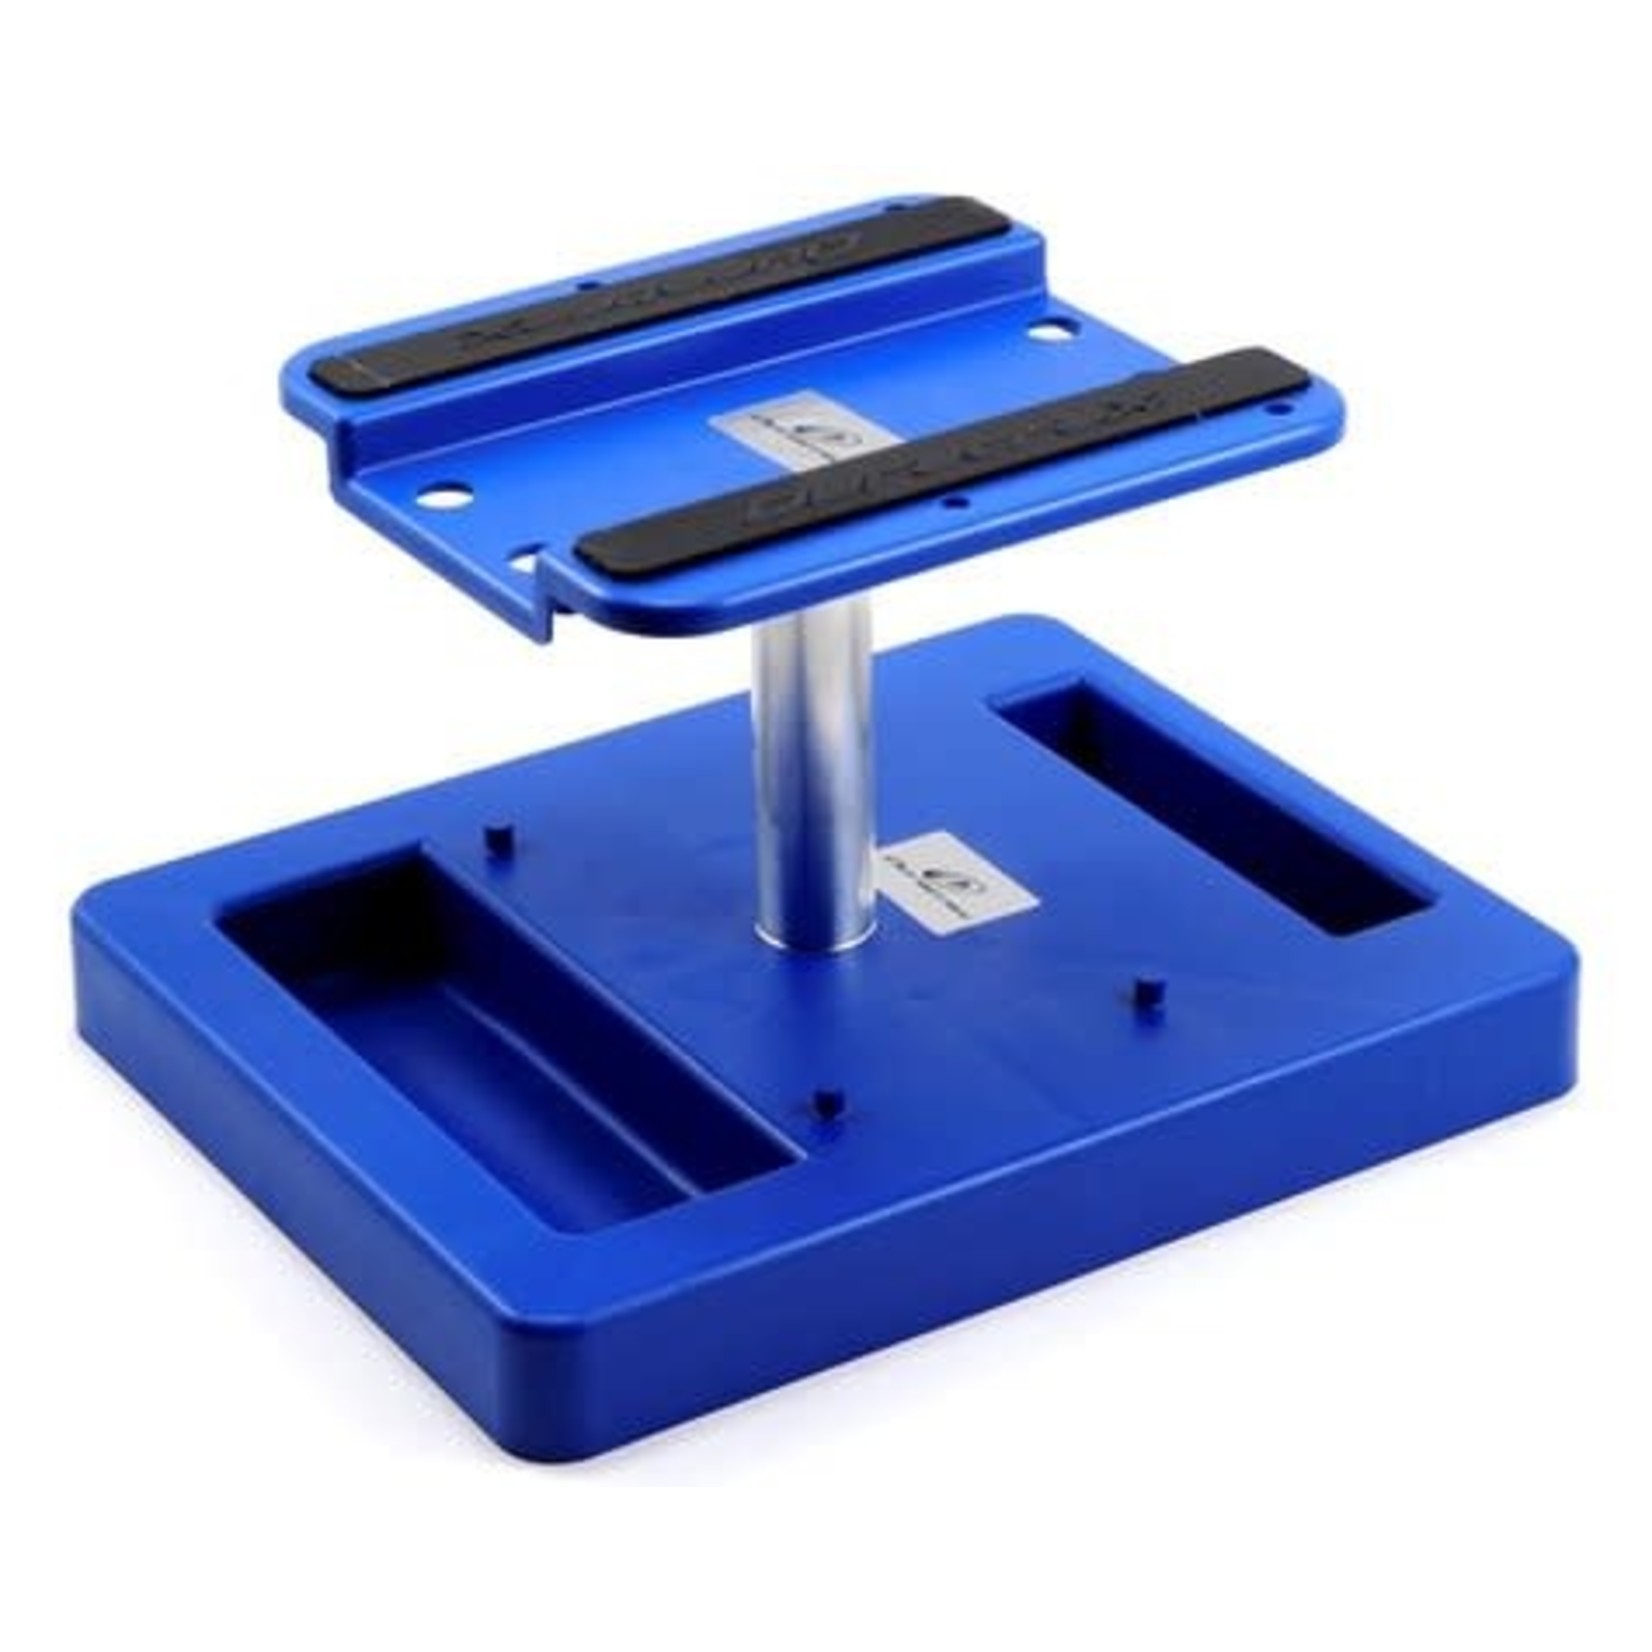 Duratrax DuraTrax Pit Tech Deluxe Truck Stand (Blue) #DTXC2380